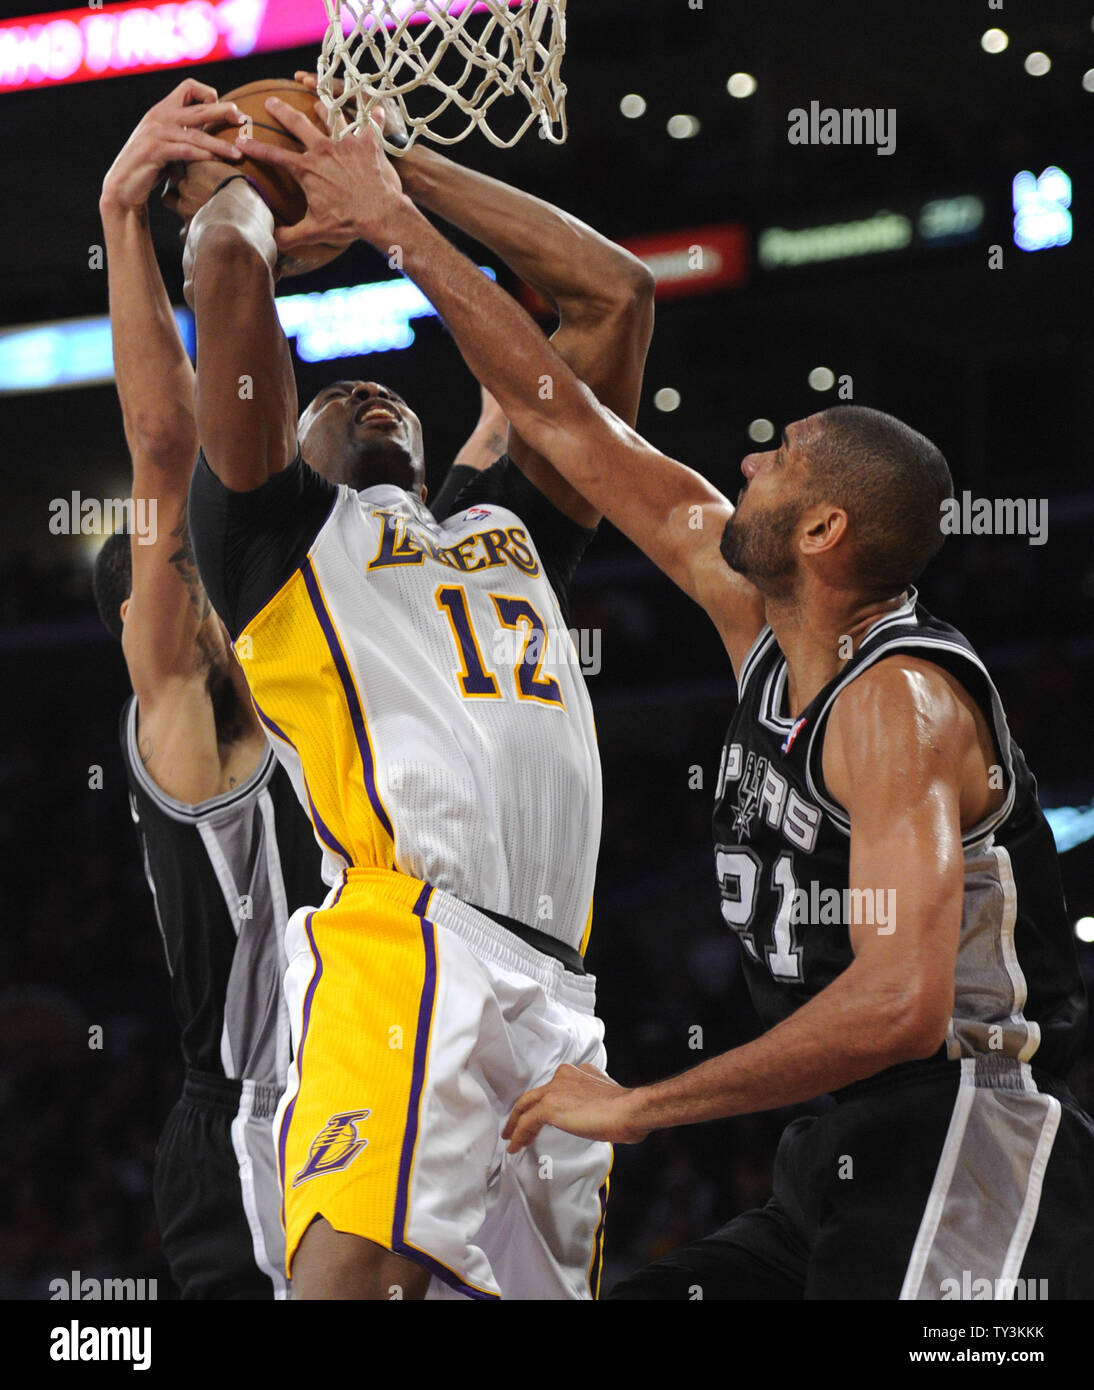 Photos: Lakers vs Spurs (11/14/21) Photo Gallery